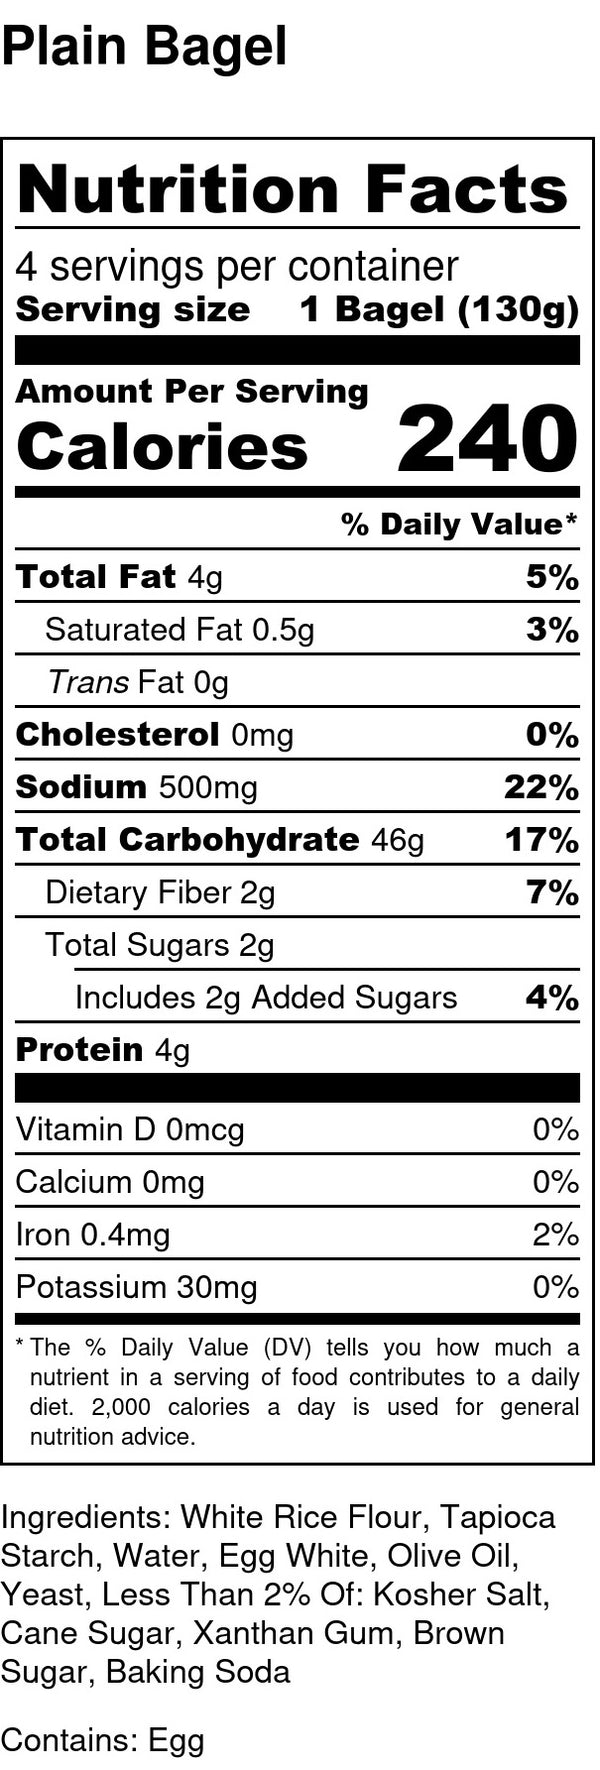 nutrition facts for gluten free and dairy free plain bagels contains eggs